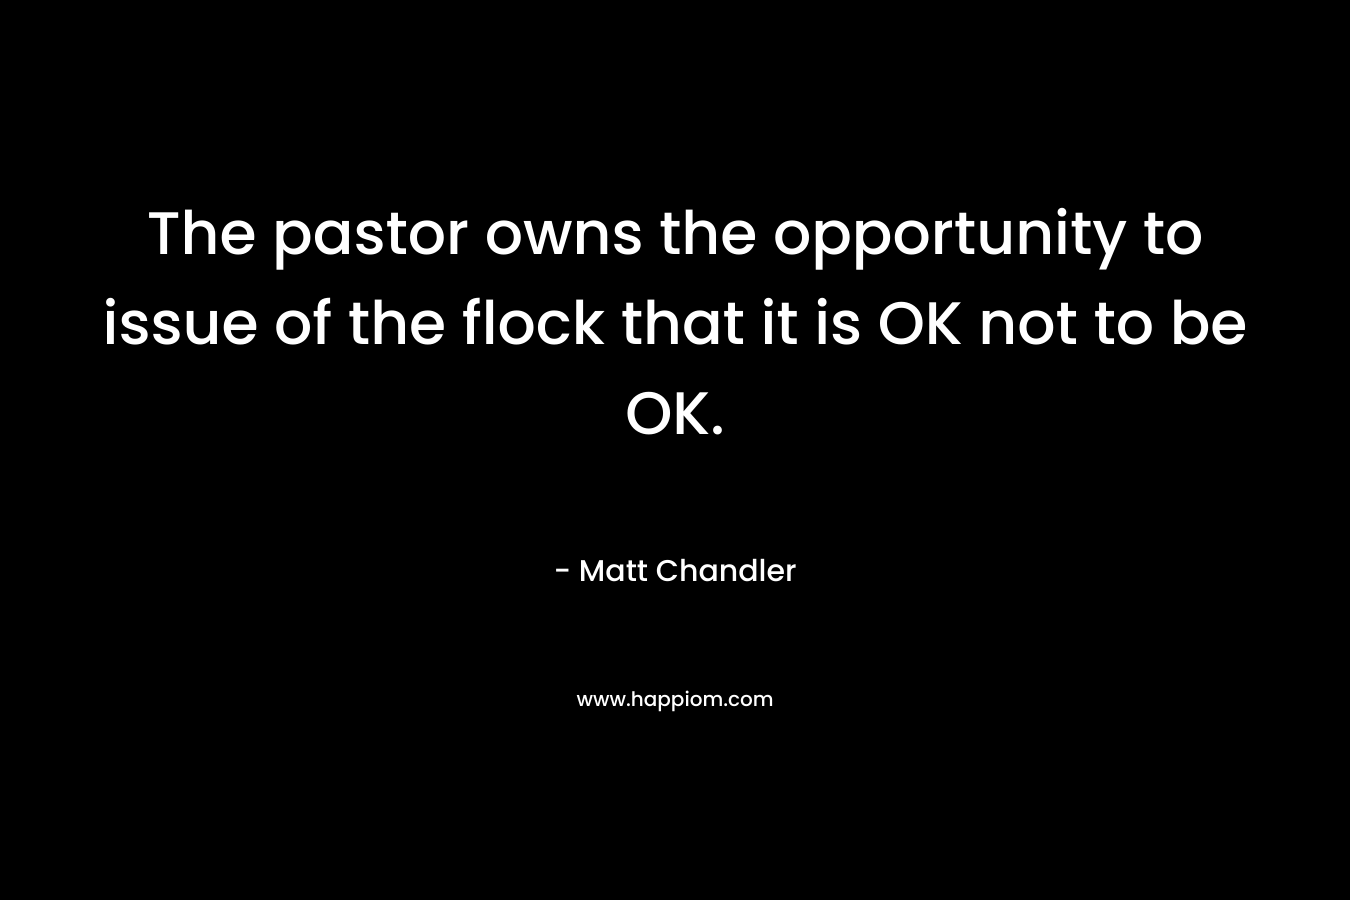 The pastor owns the opportunity to issue of the flock that it is OK not to be OK.